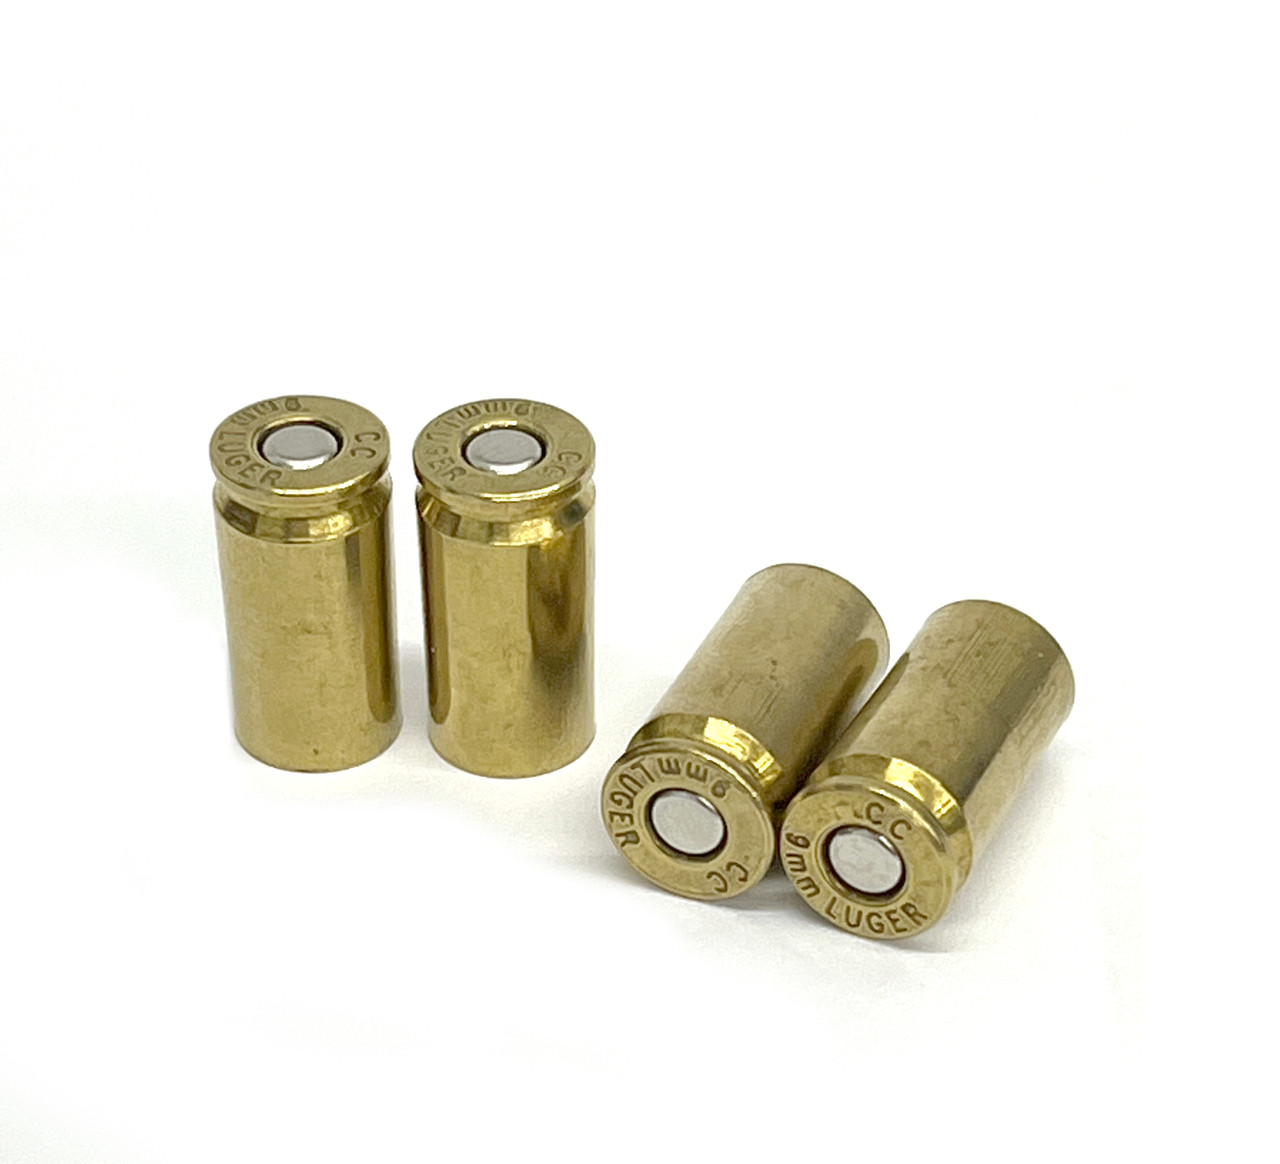 Capital Cartridge - 9mm - Processed AND Primed Brass - 500pcs